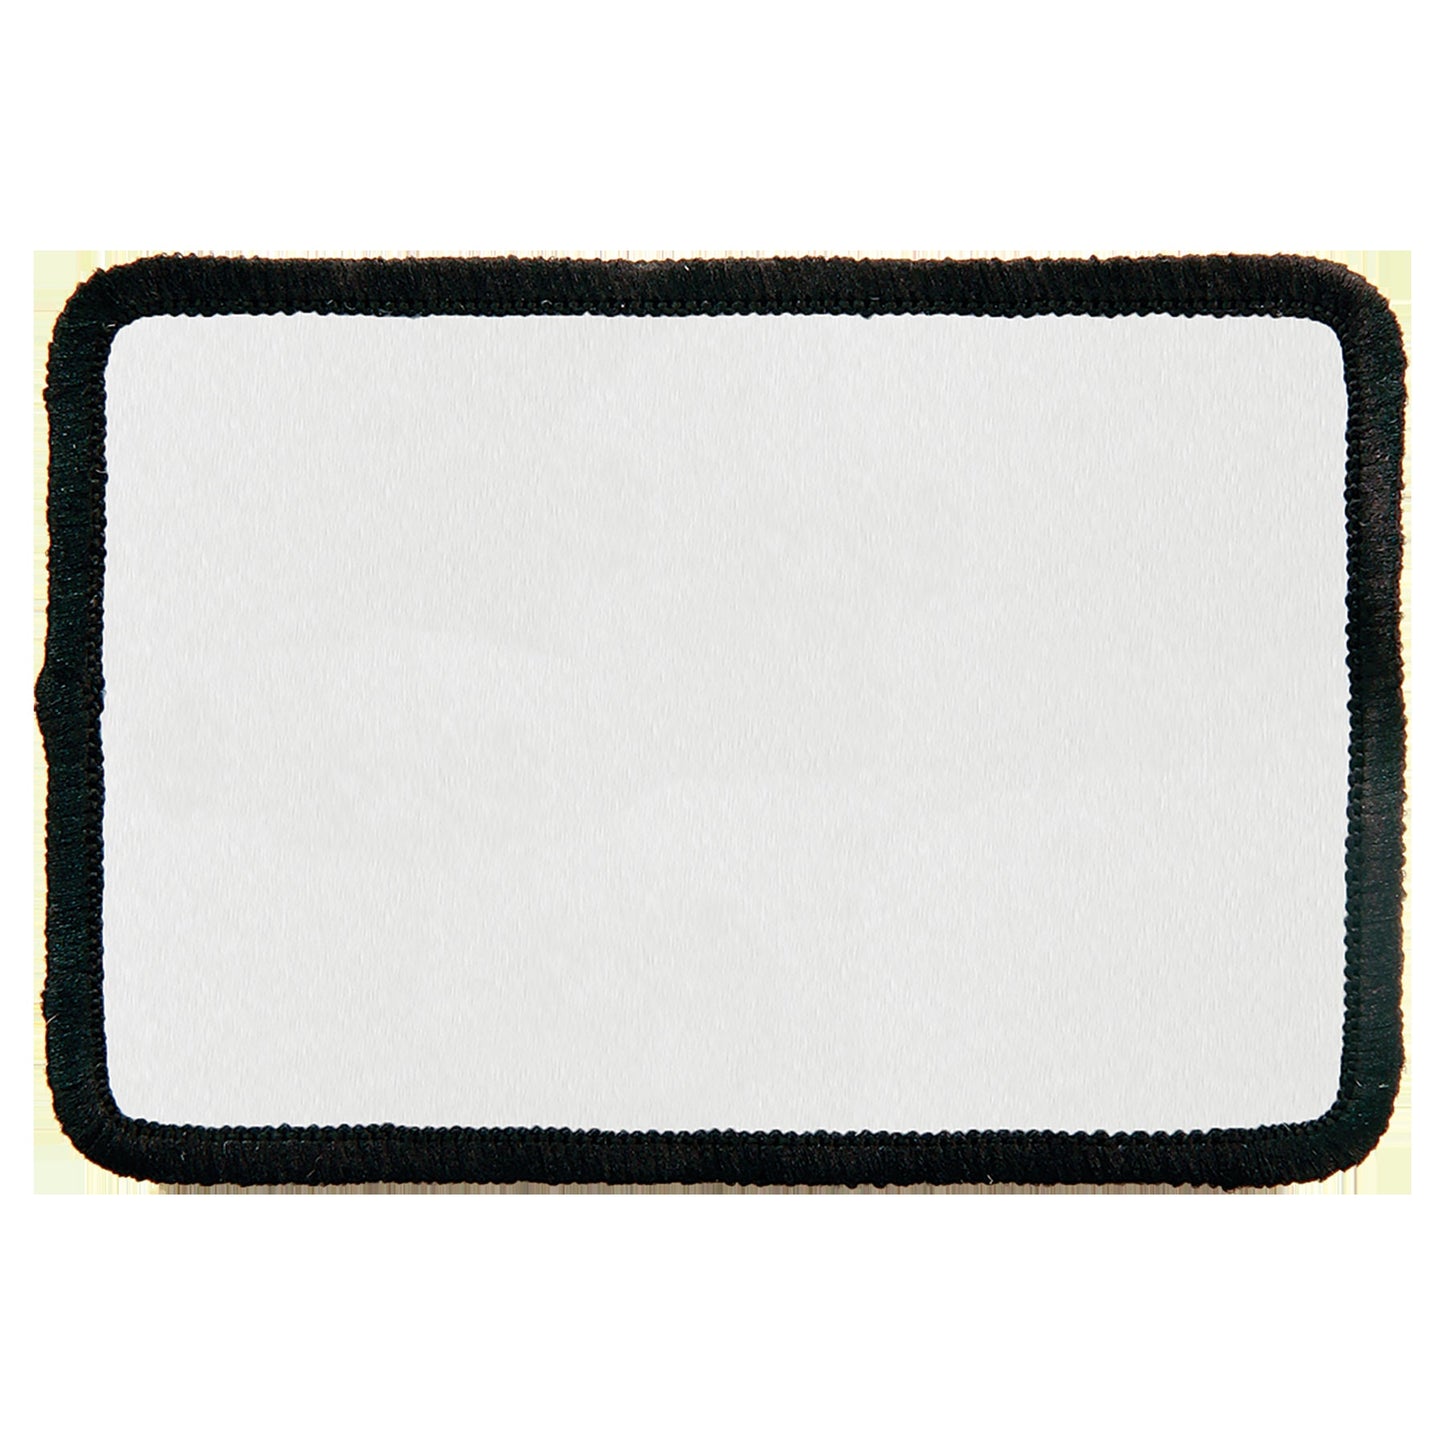 Sublimation blank patches